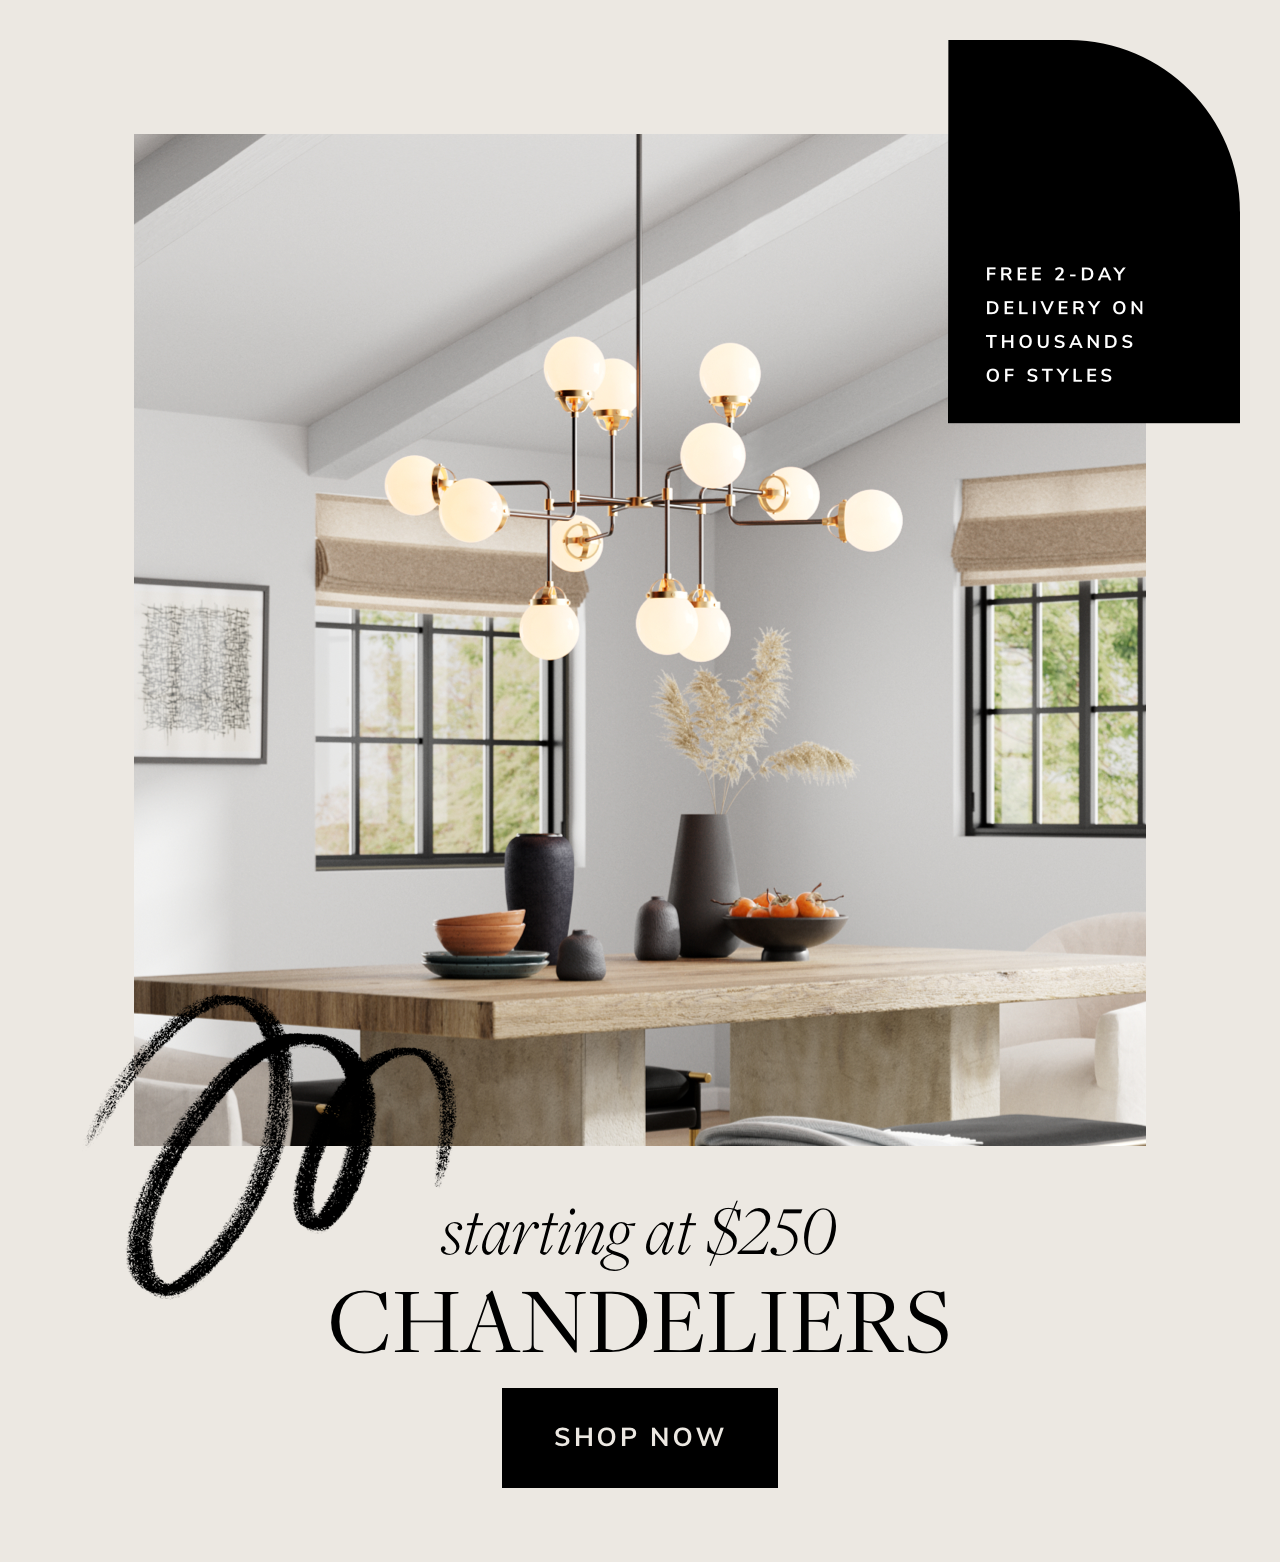  zcmmg at $250 CHANDELIERS SHOP NOW 